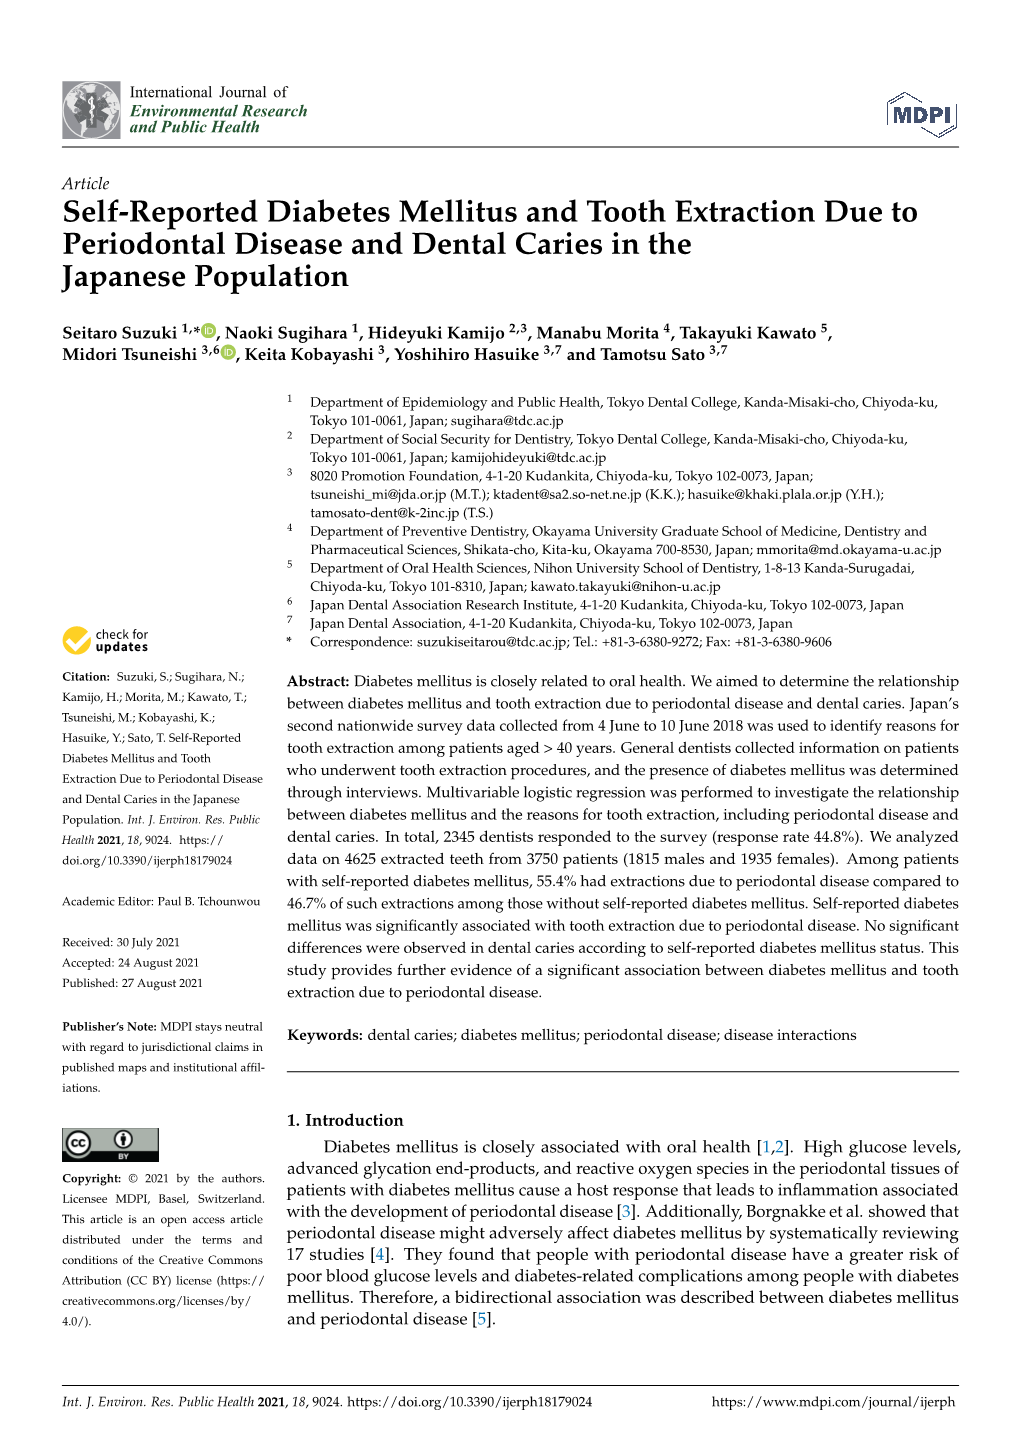 Self-Reported Diabetes Mellitus and Tooth Extraction Due to Periodontal Disease and Dental Caries in the Japanese Population